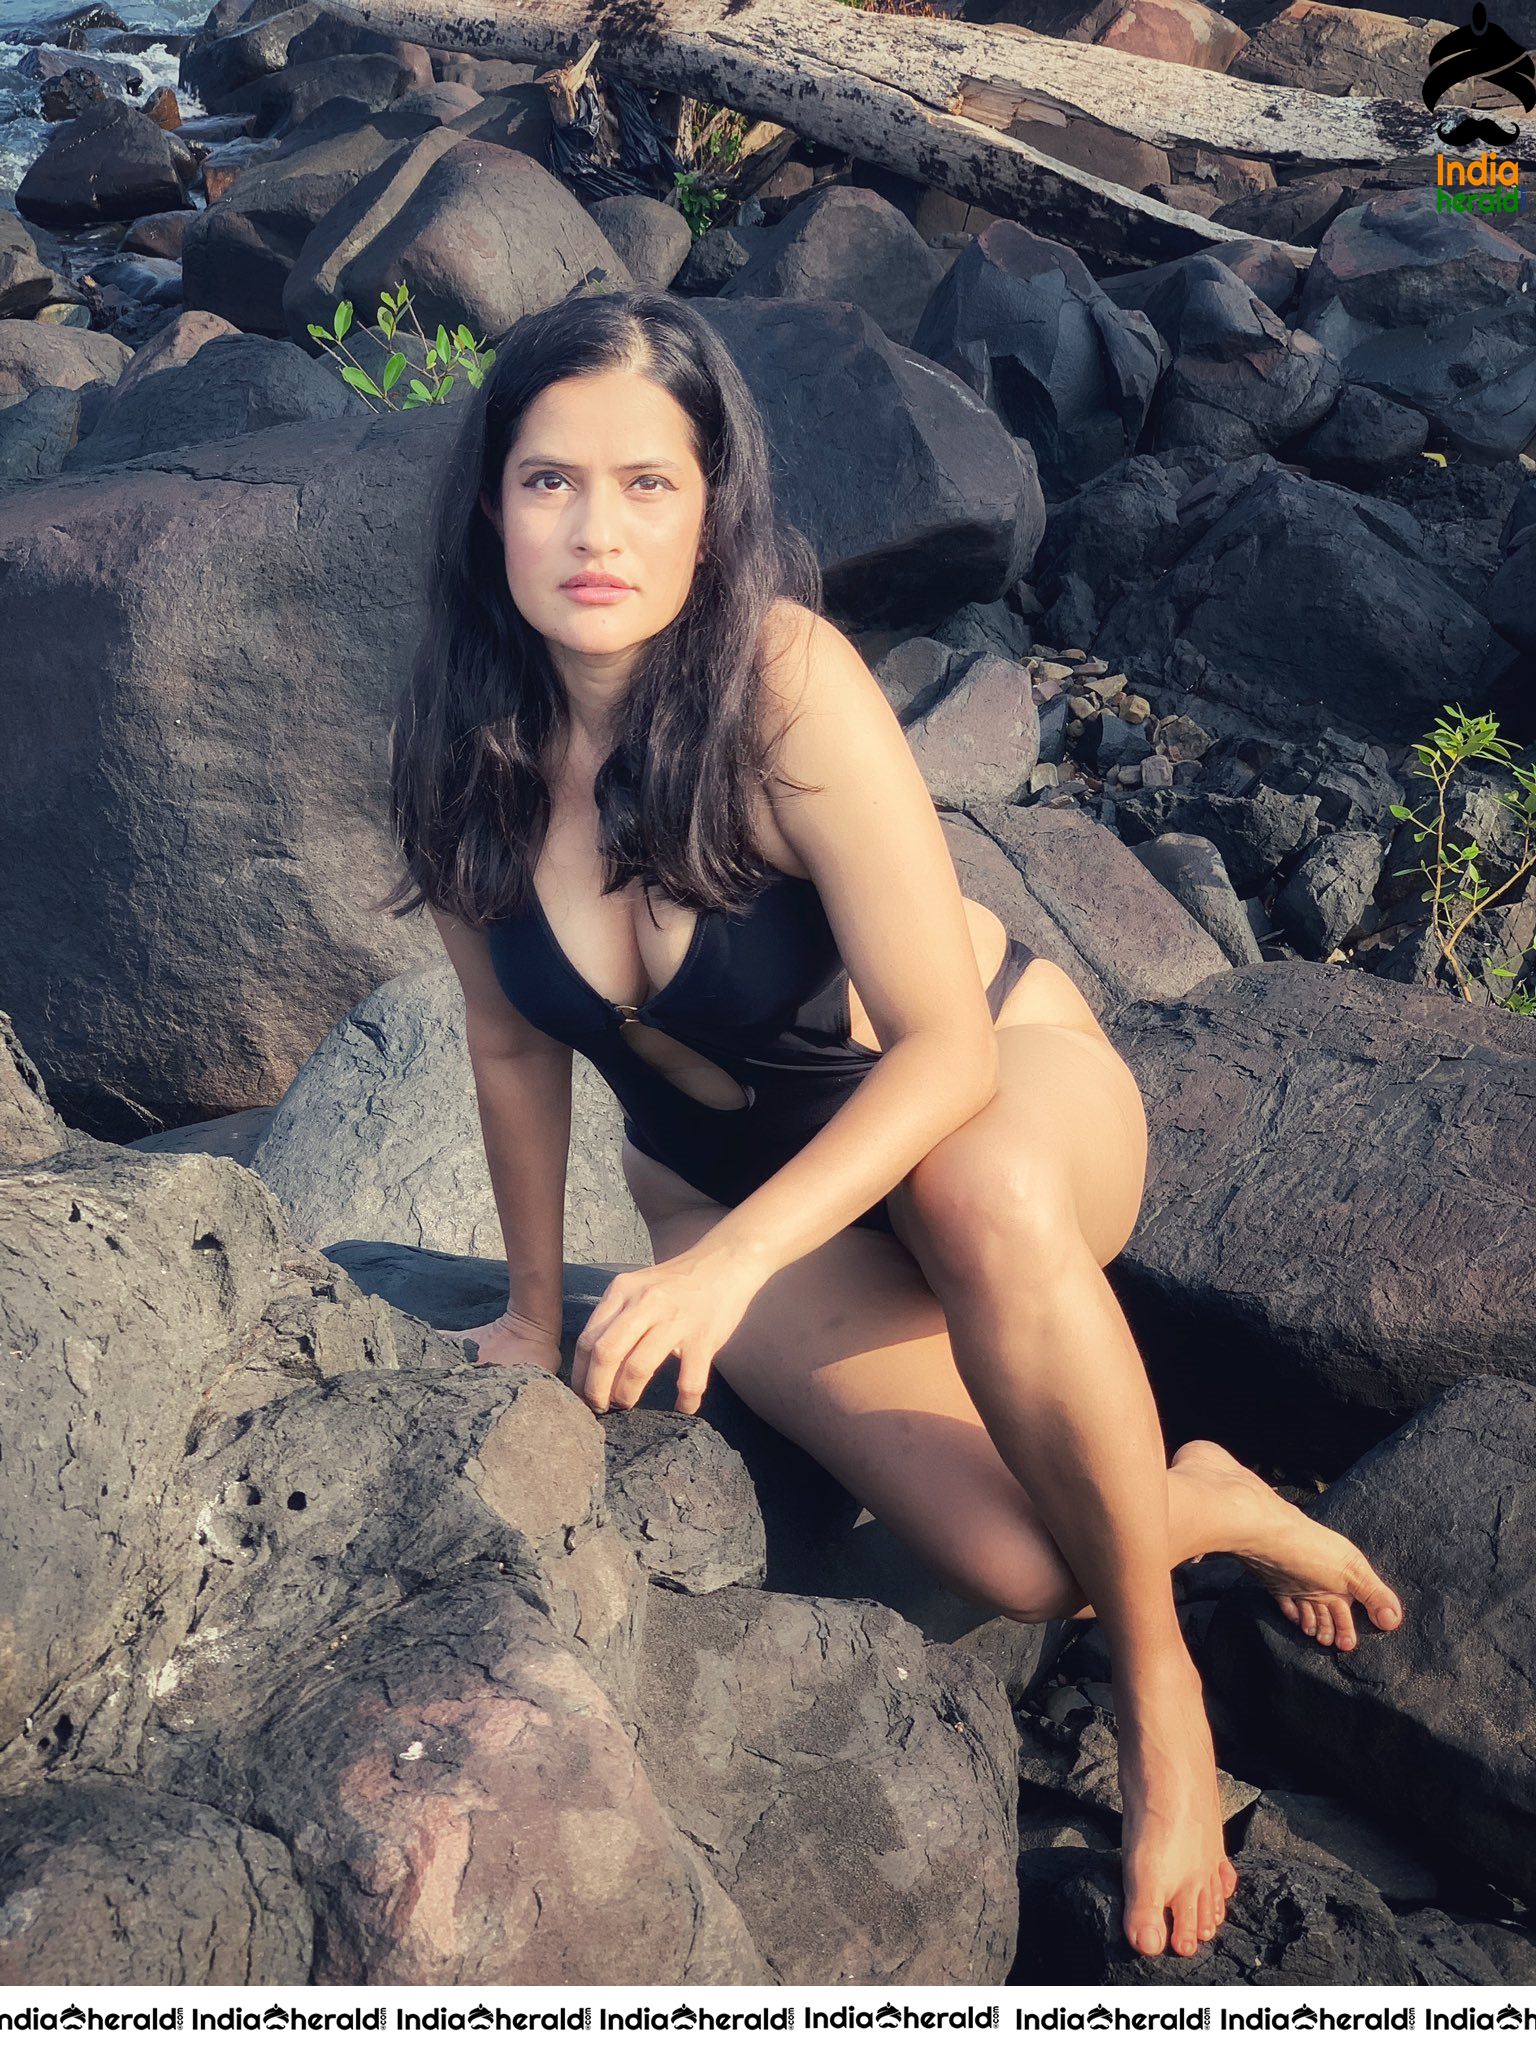 Sona Mohapatra Sizzles In Bikini And Sexposes On The Beach Set 2